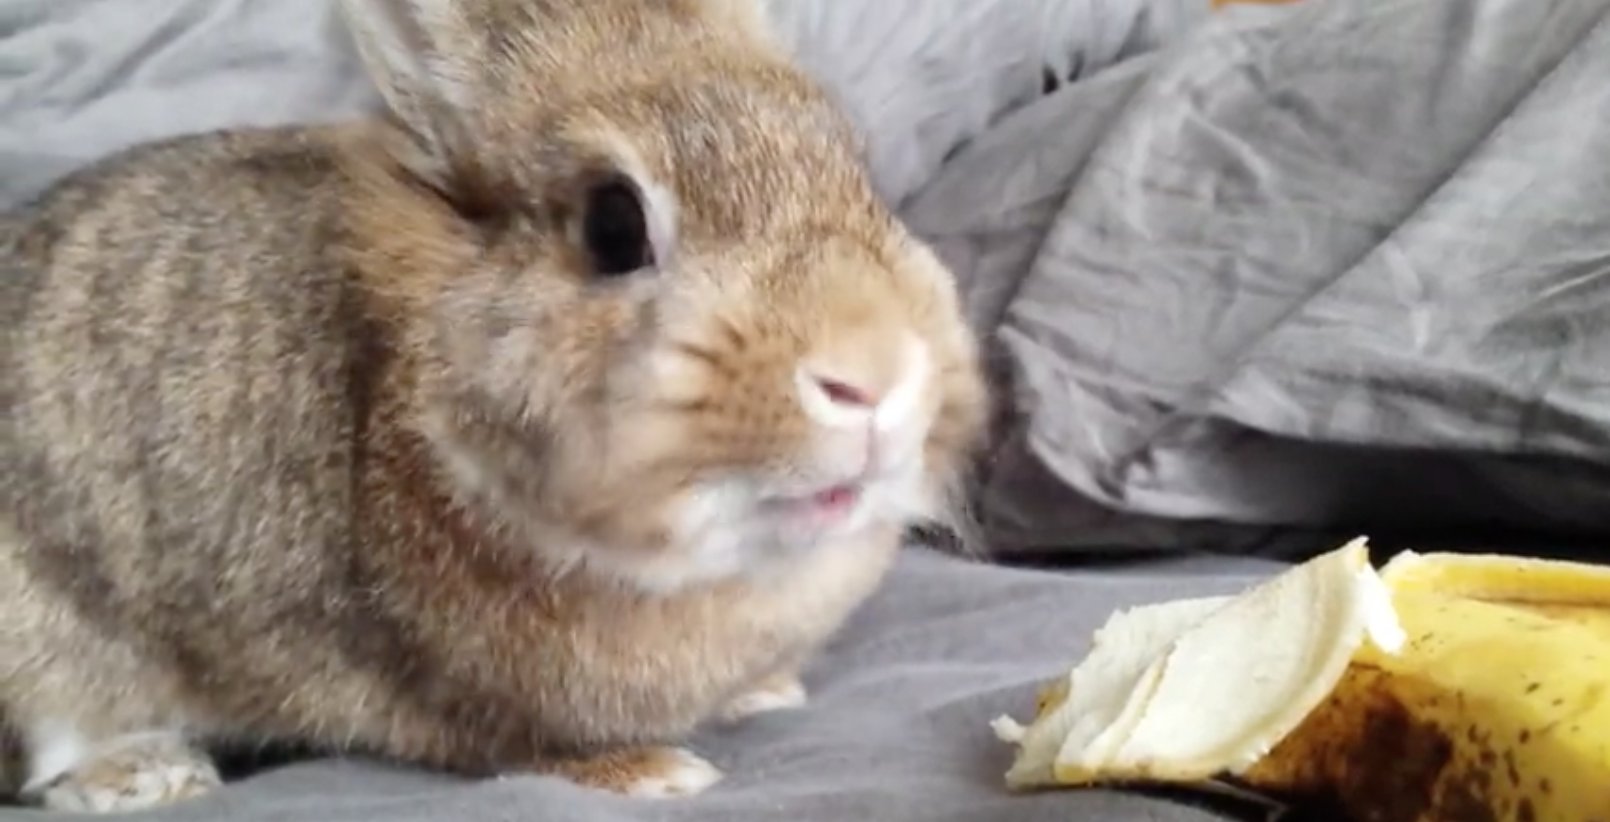 Screen Shot 2016 10 11 at 7.22.56 PM.png?resize=1200,630 - This Adorable Rabbit Ate A Banana In A Very Cute Way!